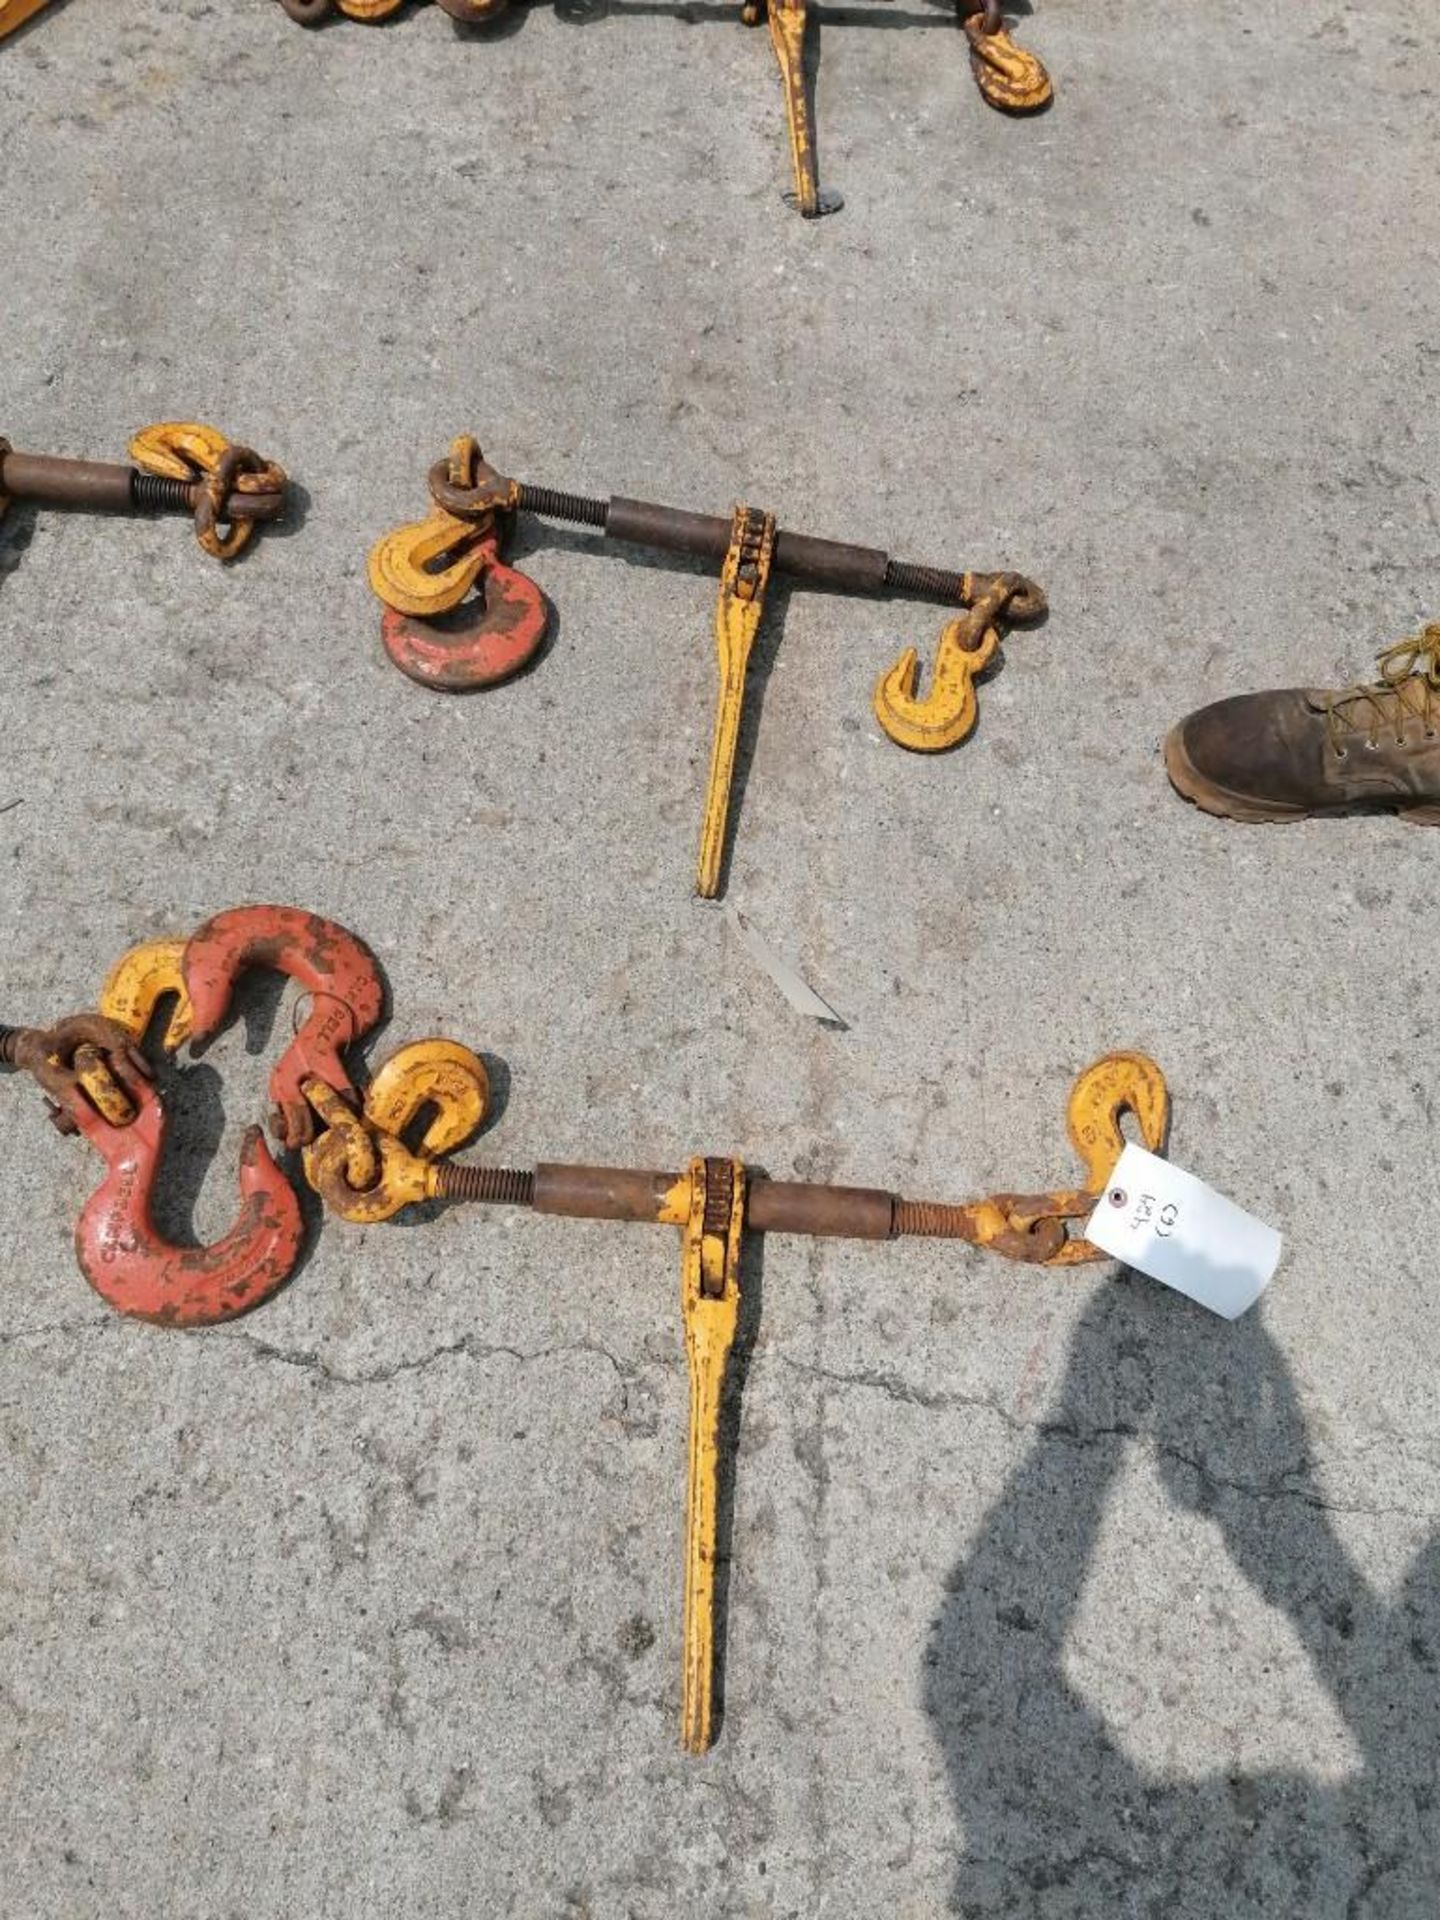 (6) Ratchet Load Binder 13000 pounds Double hooked. Located at 301 E Henry Street, Mt. Pleasant, - Image 2 of 4